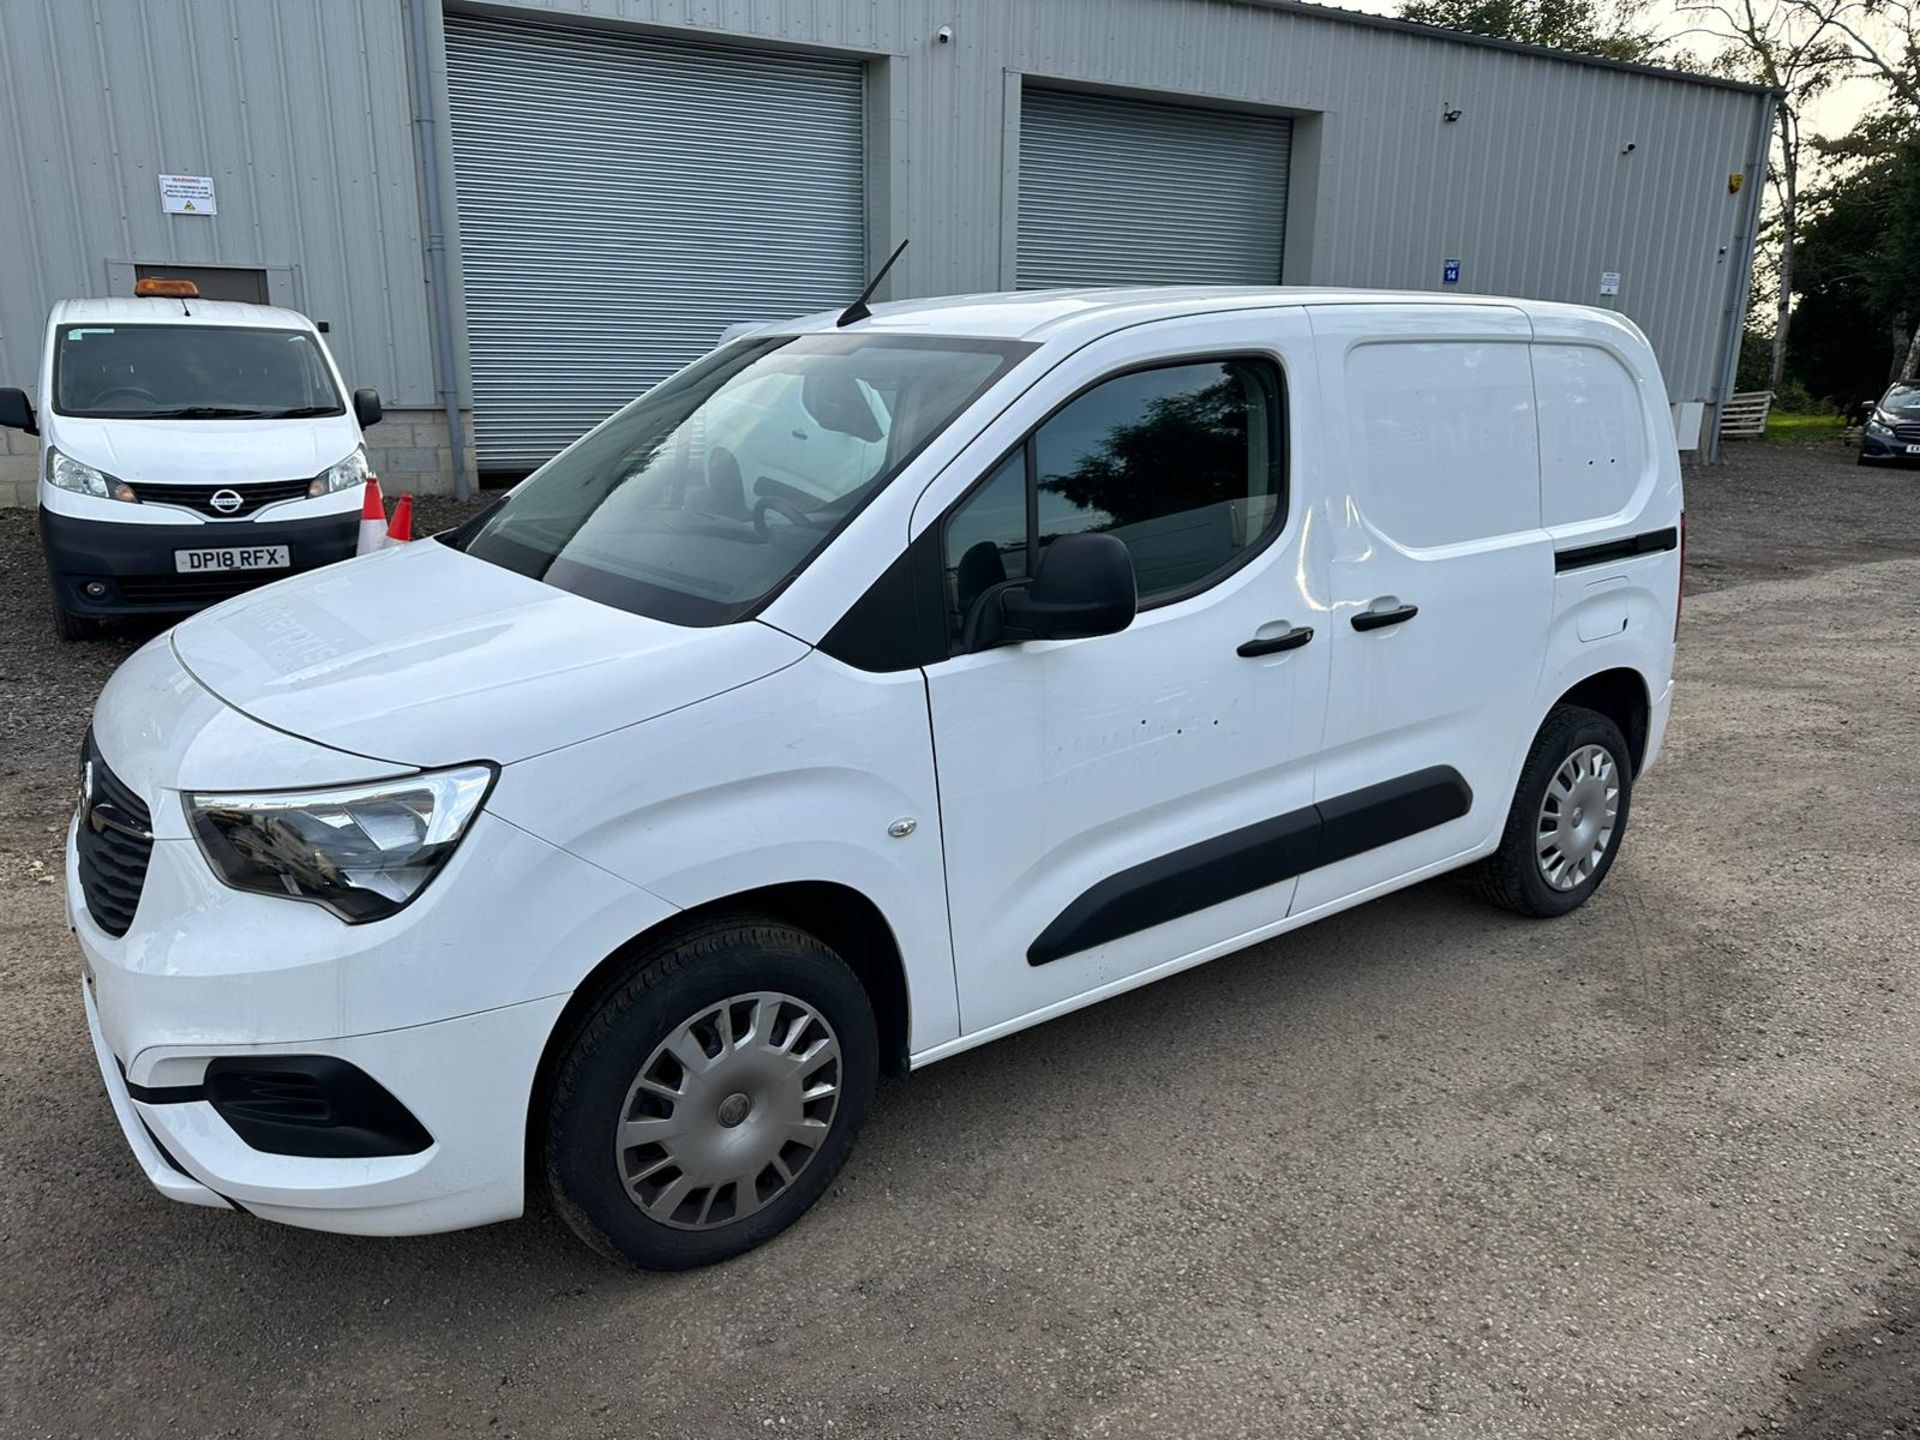 2020 20 VAUXHALL COMBO SPORTIVE PANEL VAN - 68K MILES - AIR CON - PLY LINED